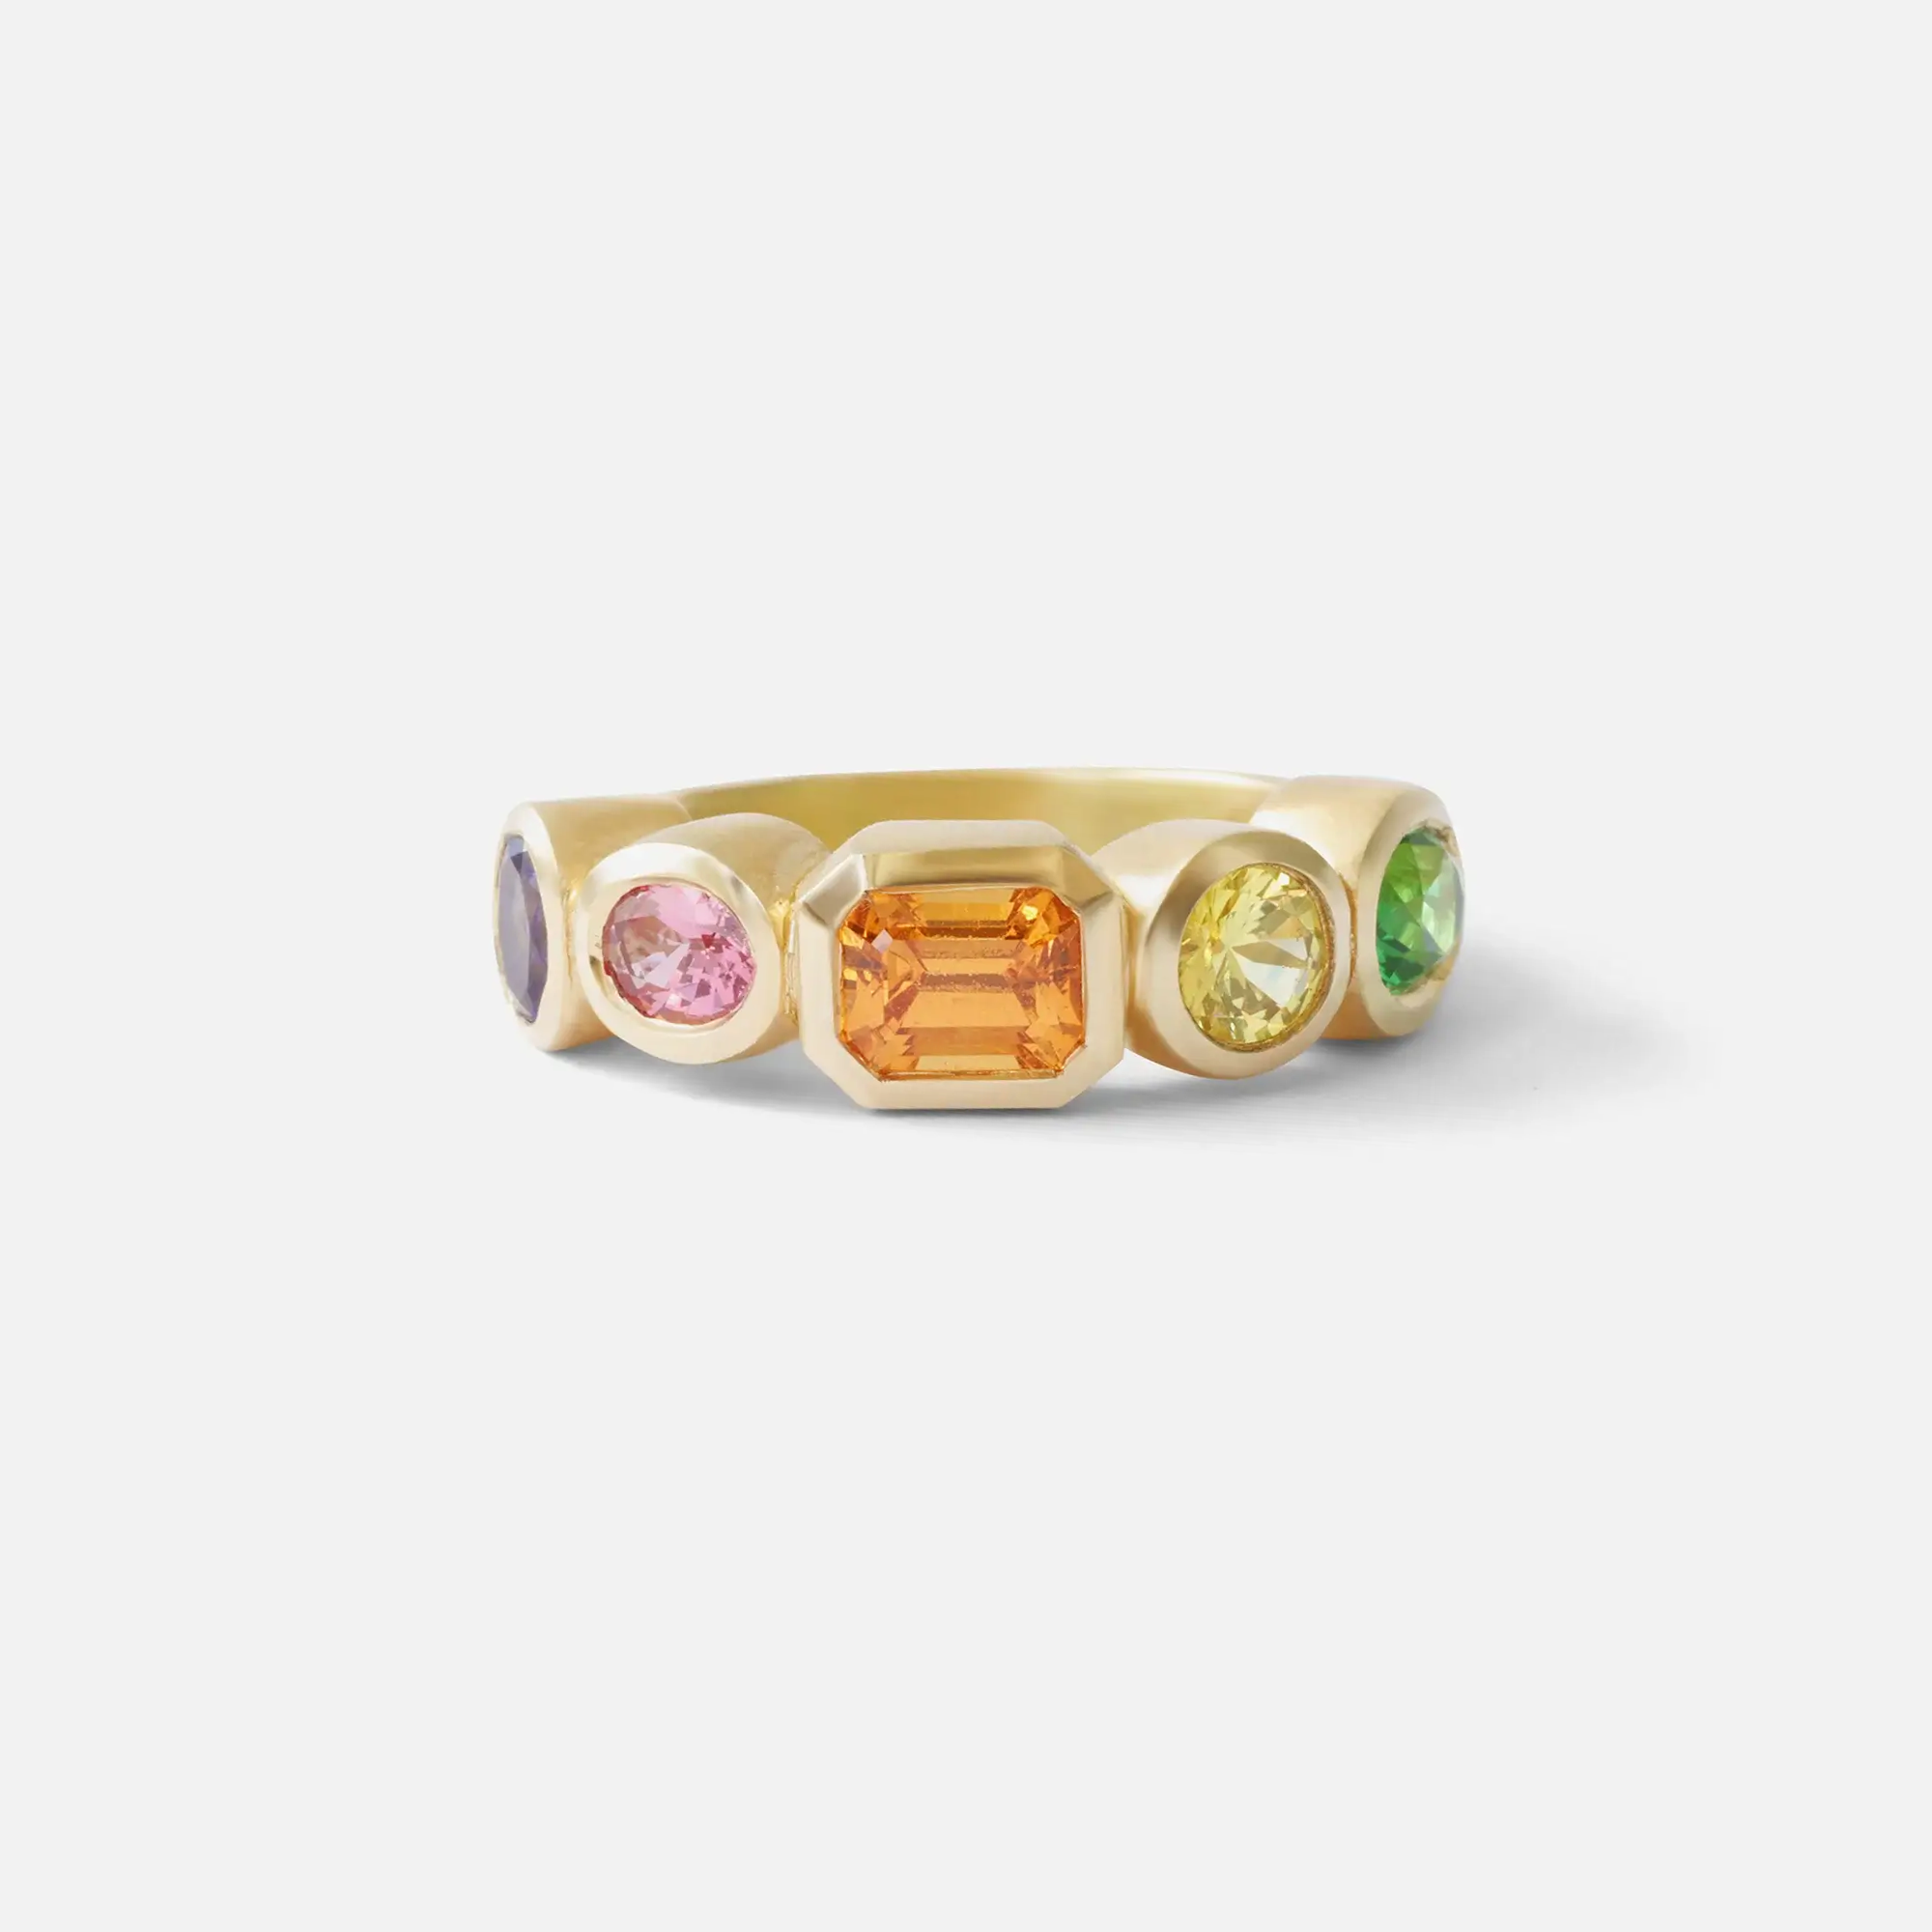 5 Stone Candy Ring By Bree Altman in Wedding Bands Category